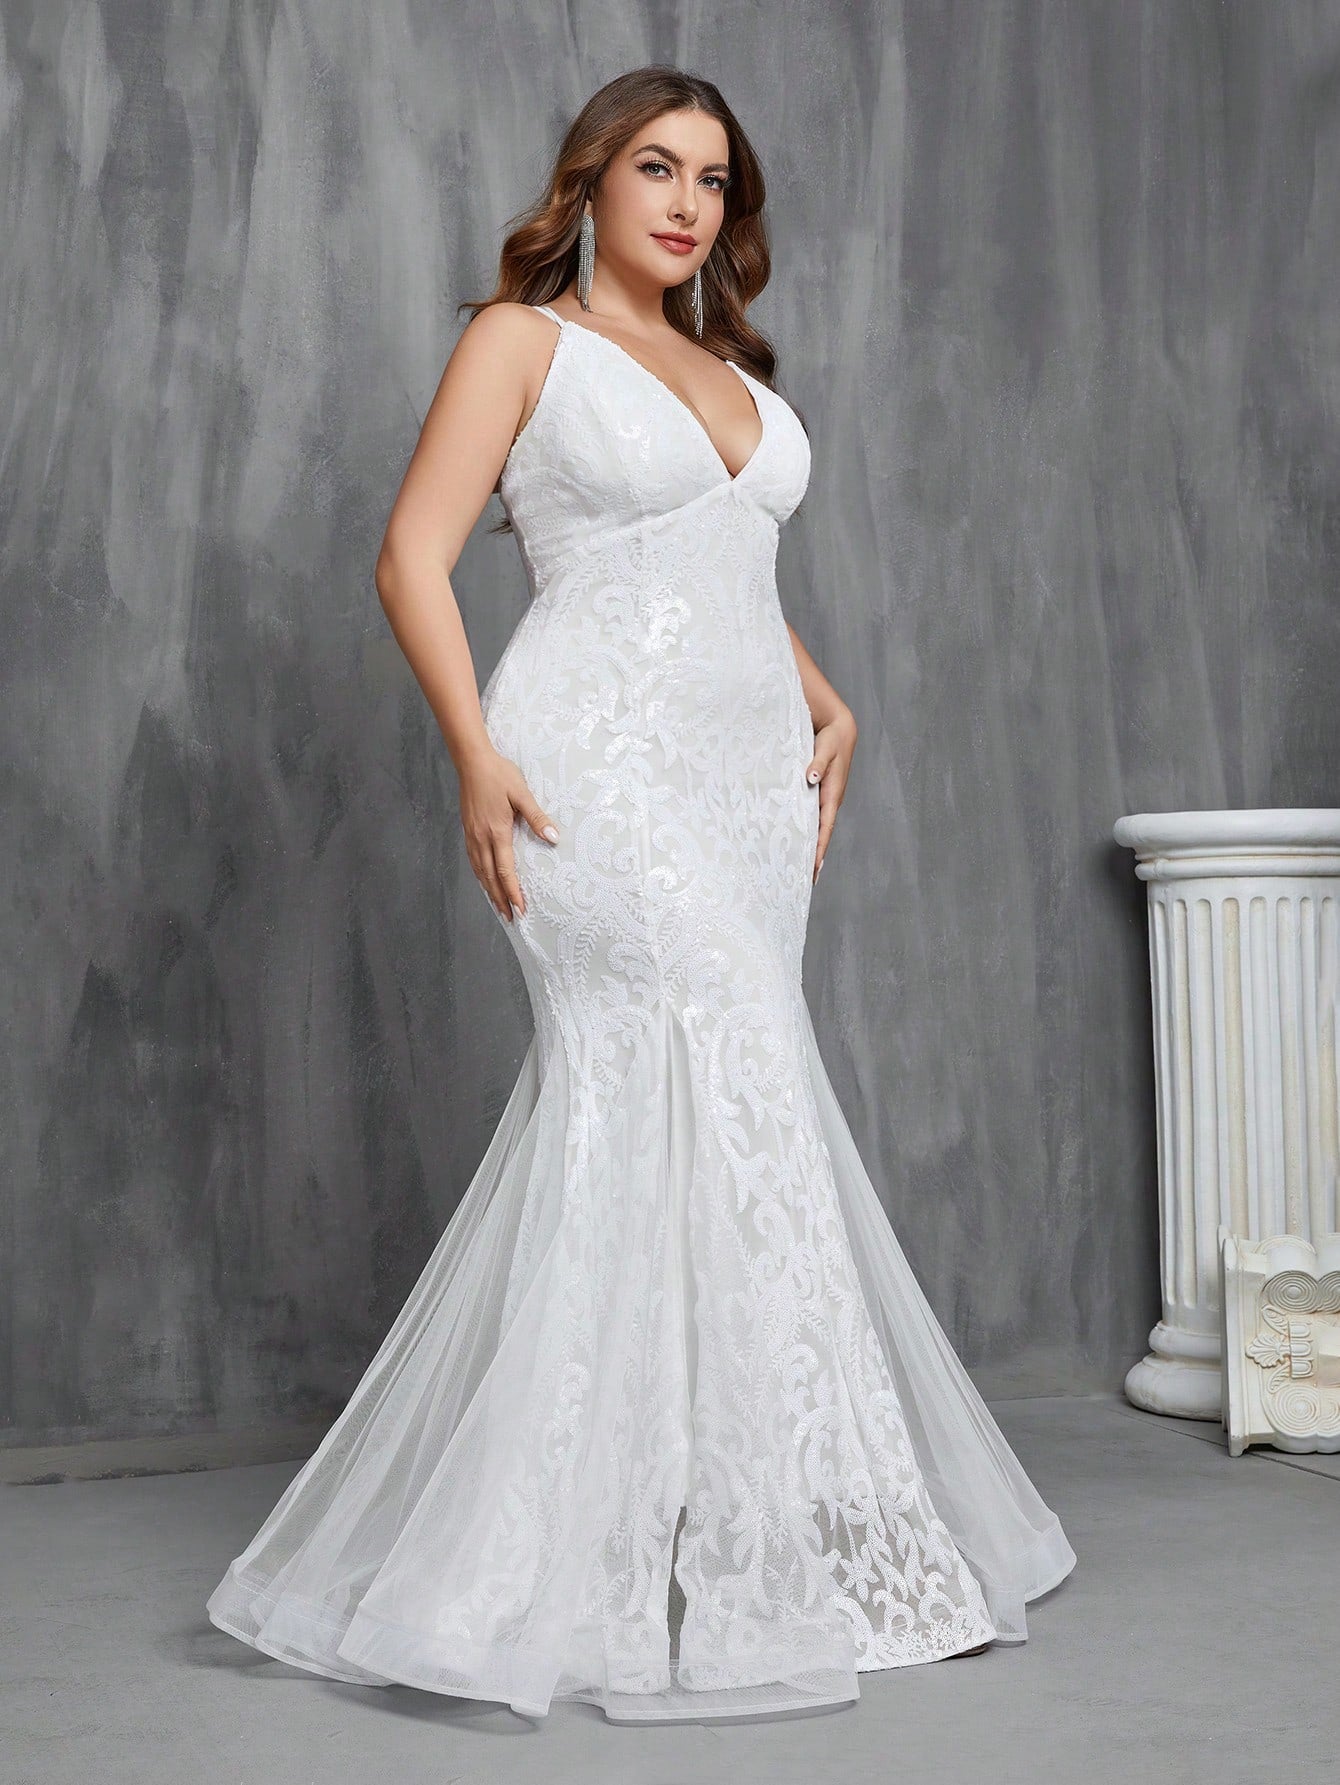 Sparkling Elegance: Plus Size Women's Mermaid Sequin Mesh Splicing Wedding Dress with Lace Up Back